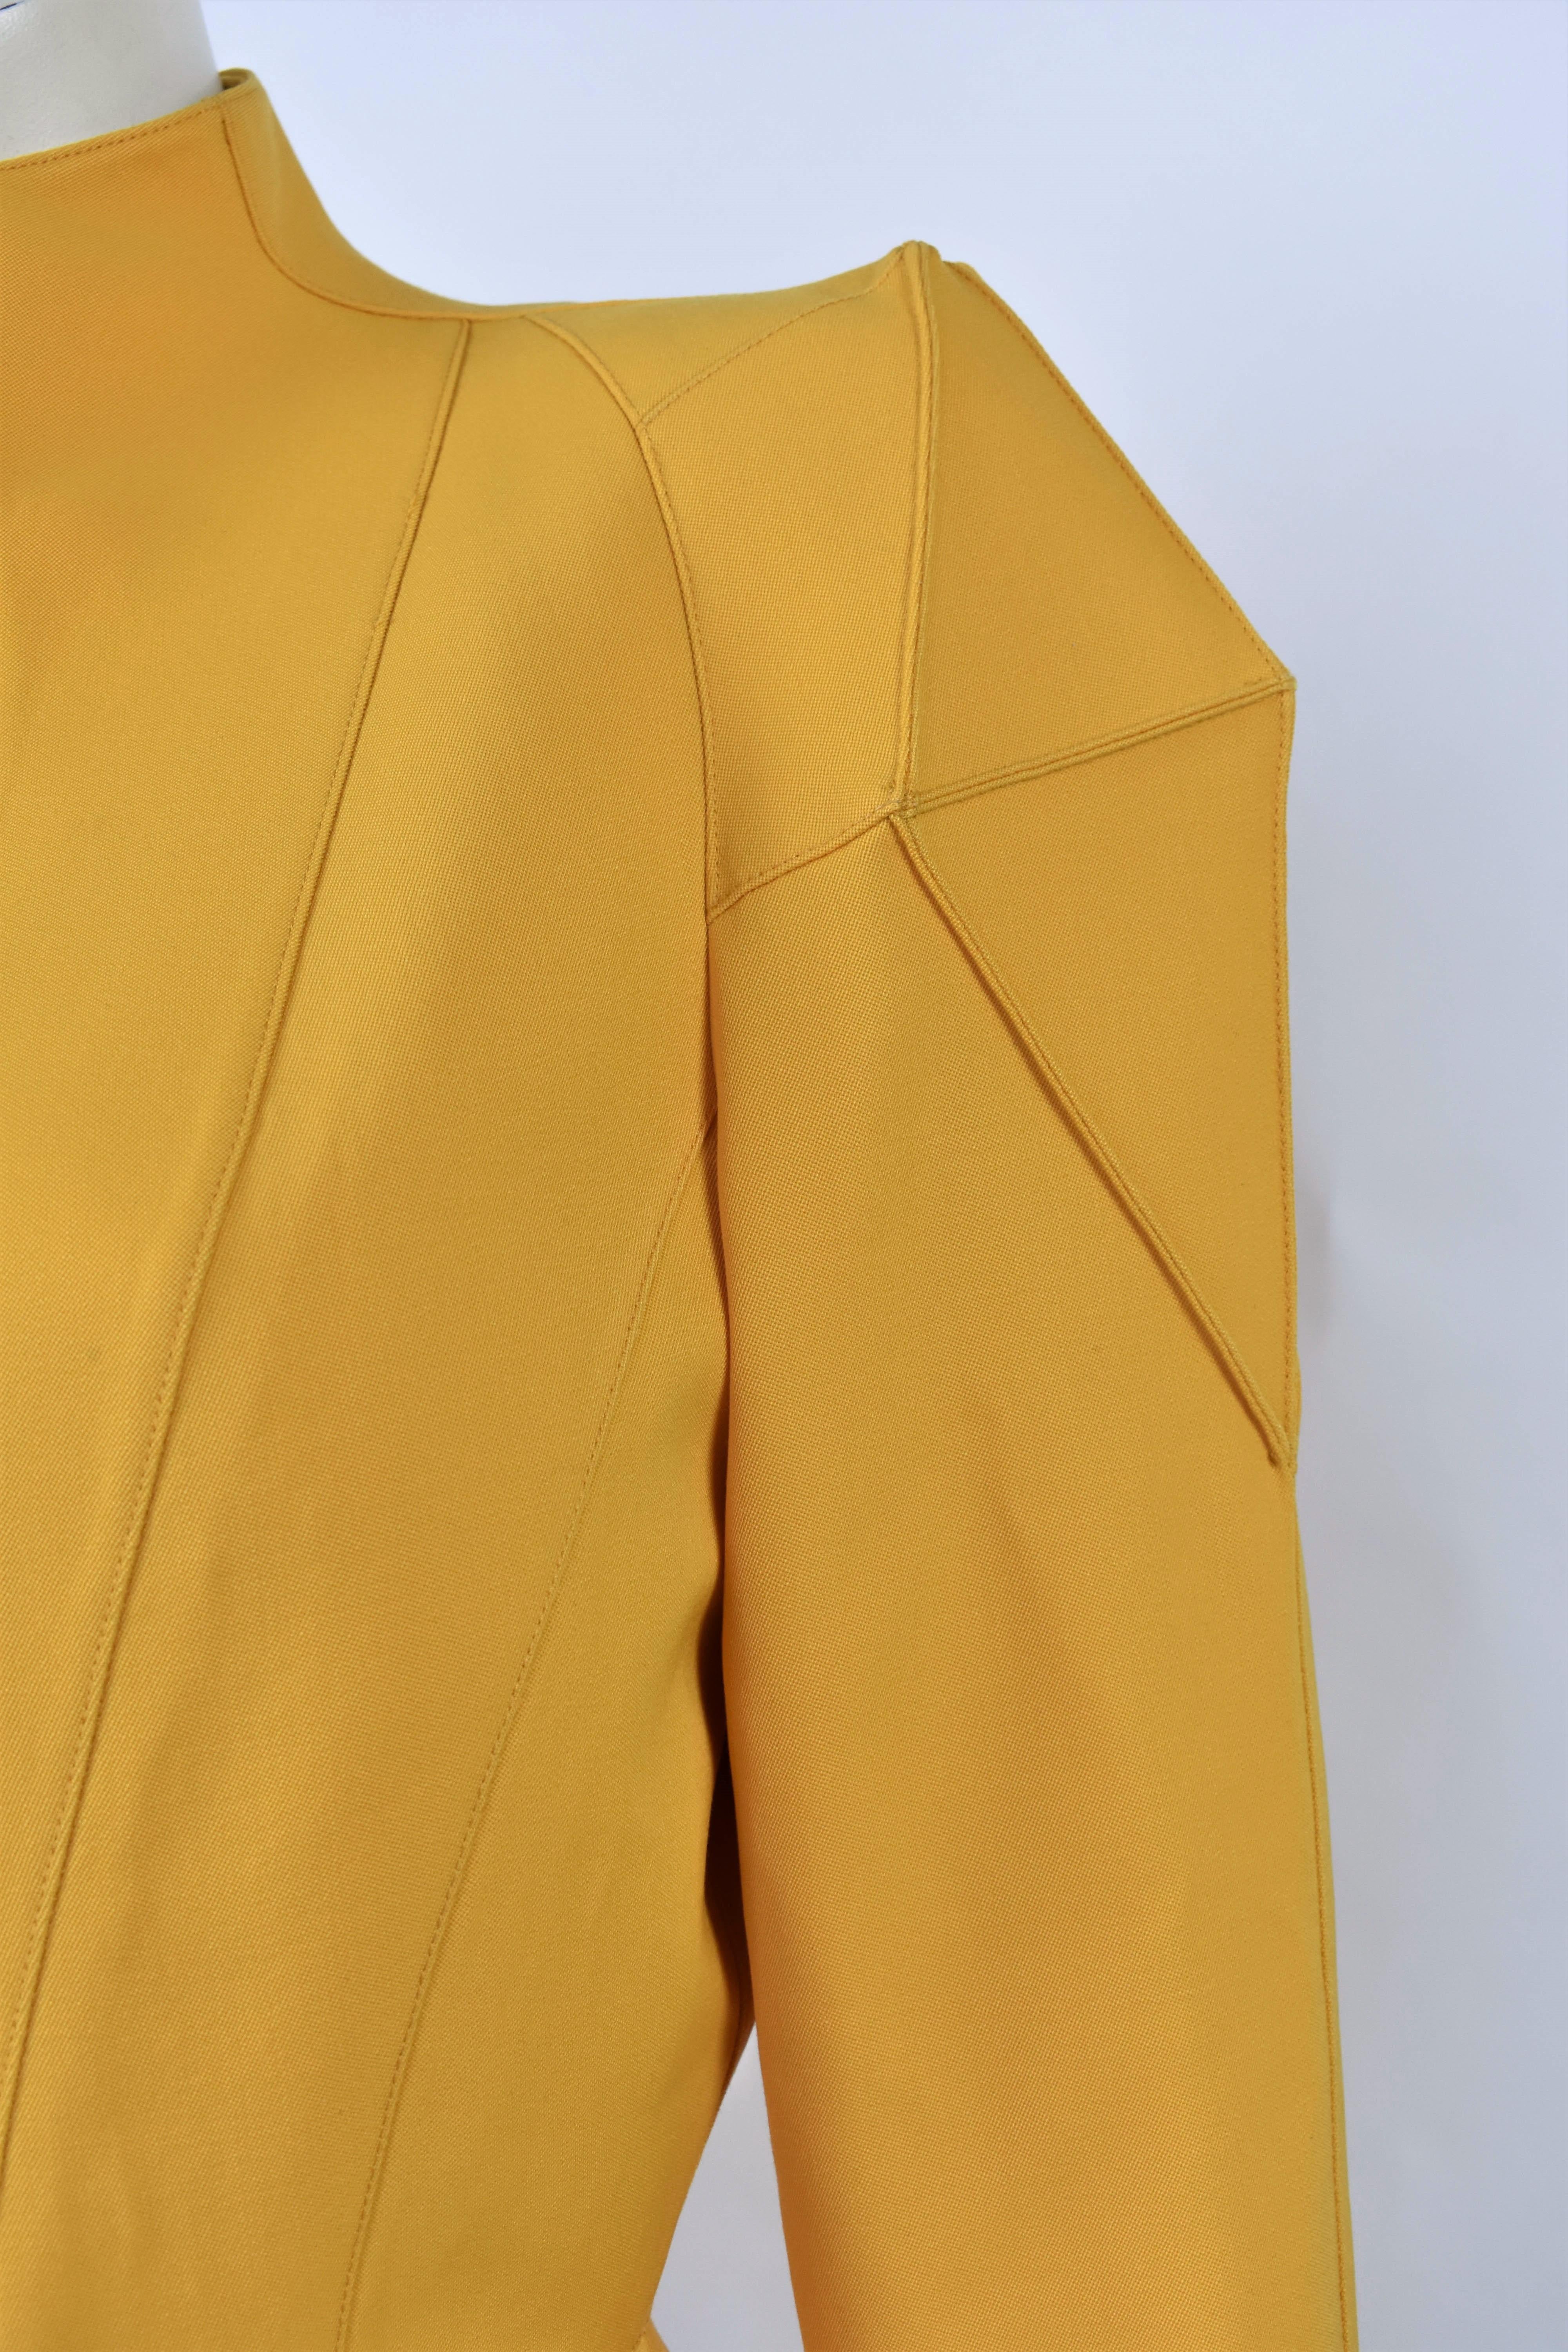 Women's FINAL SALE 1980s Thierry Mugler Sculptural Yellow Blazer with Star Pockets For Sale